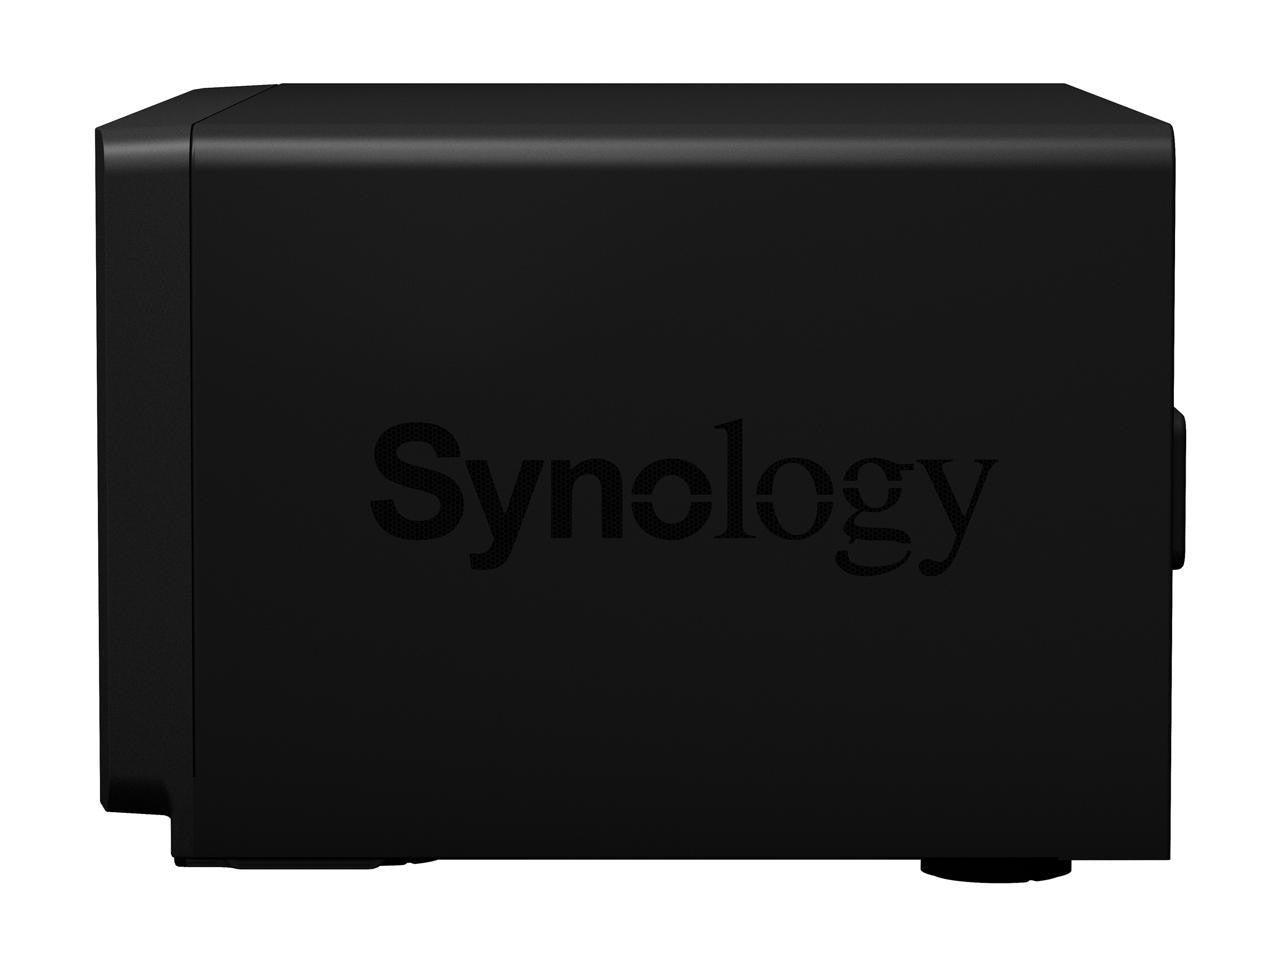 Synology DS1821+ 8-BAY DiskStation with 8GB RAM, 1.6TB (2x800GB) Cache and 64TB (8 x 8TB) of Synology Enterprise HAT5300 Drives Fully Assembled and Tested